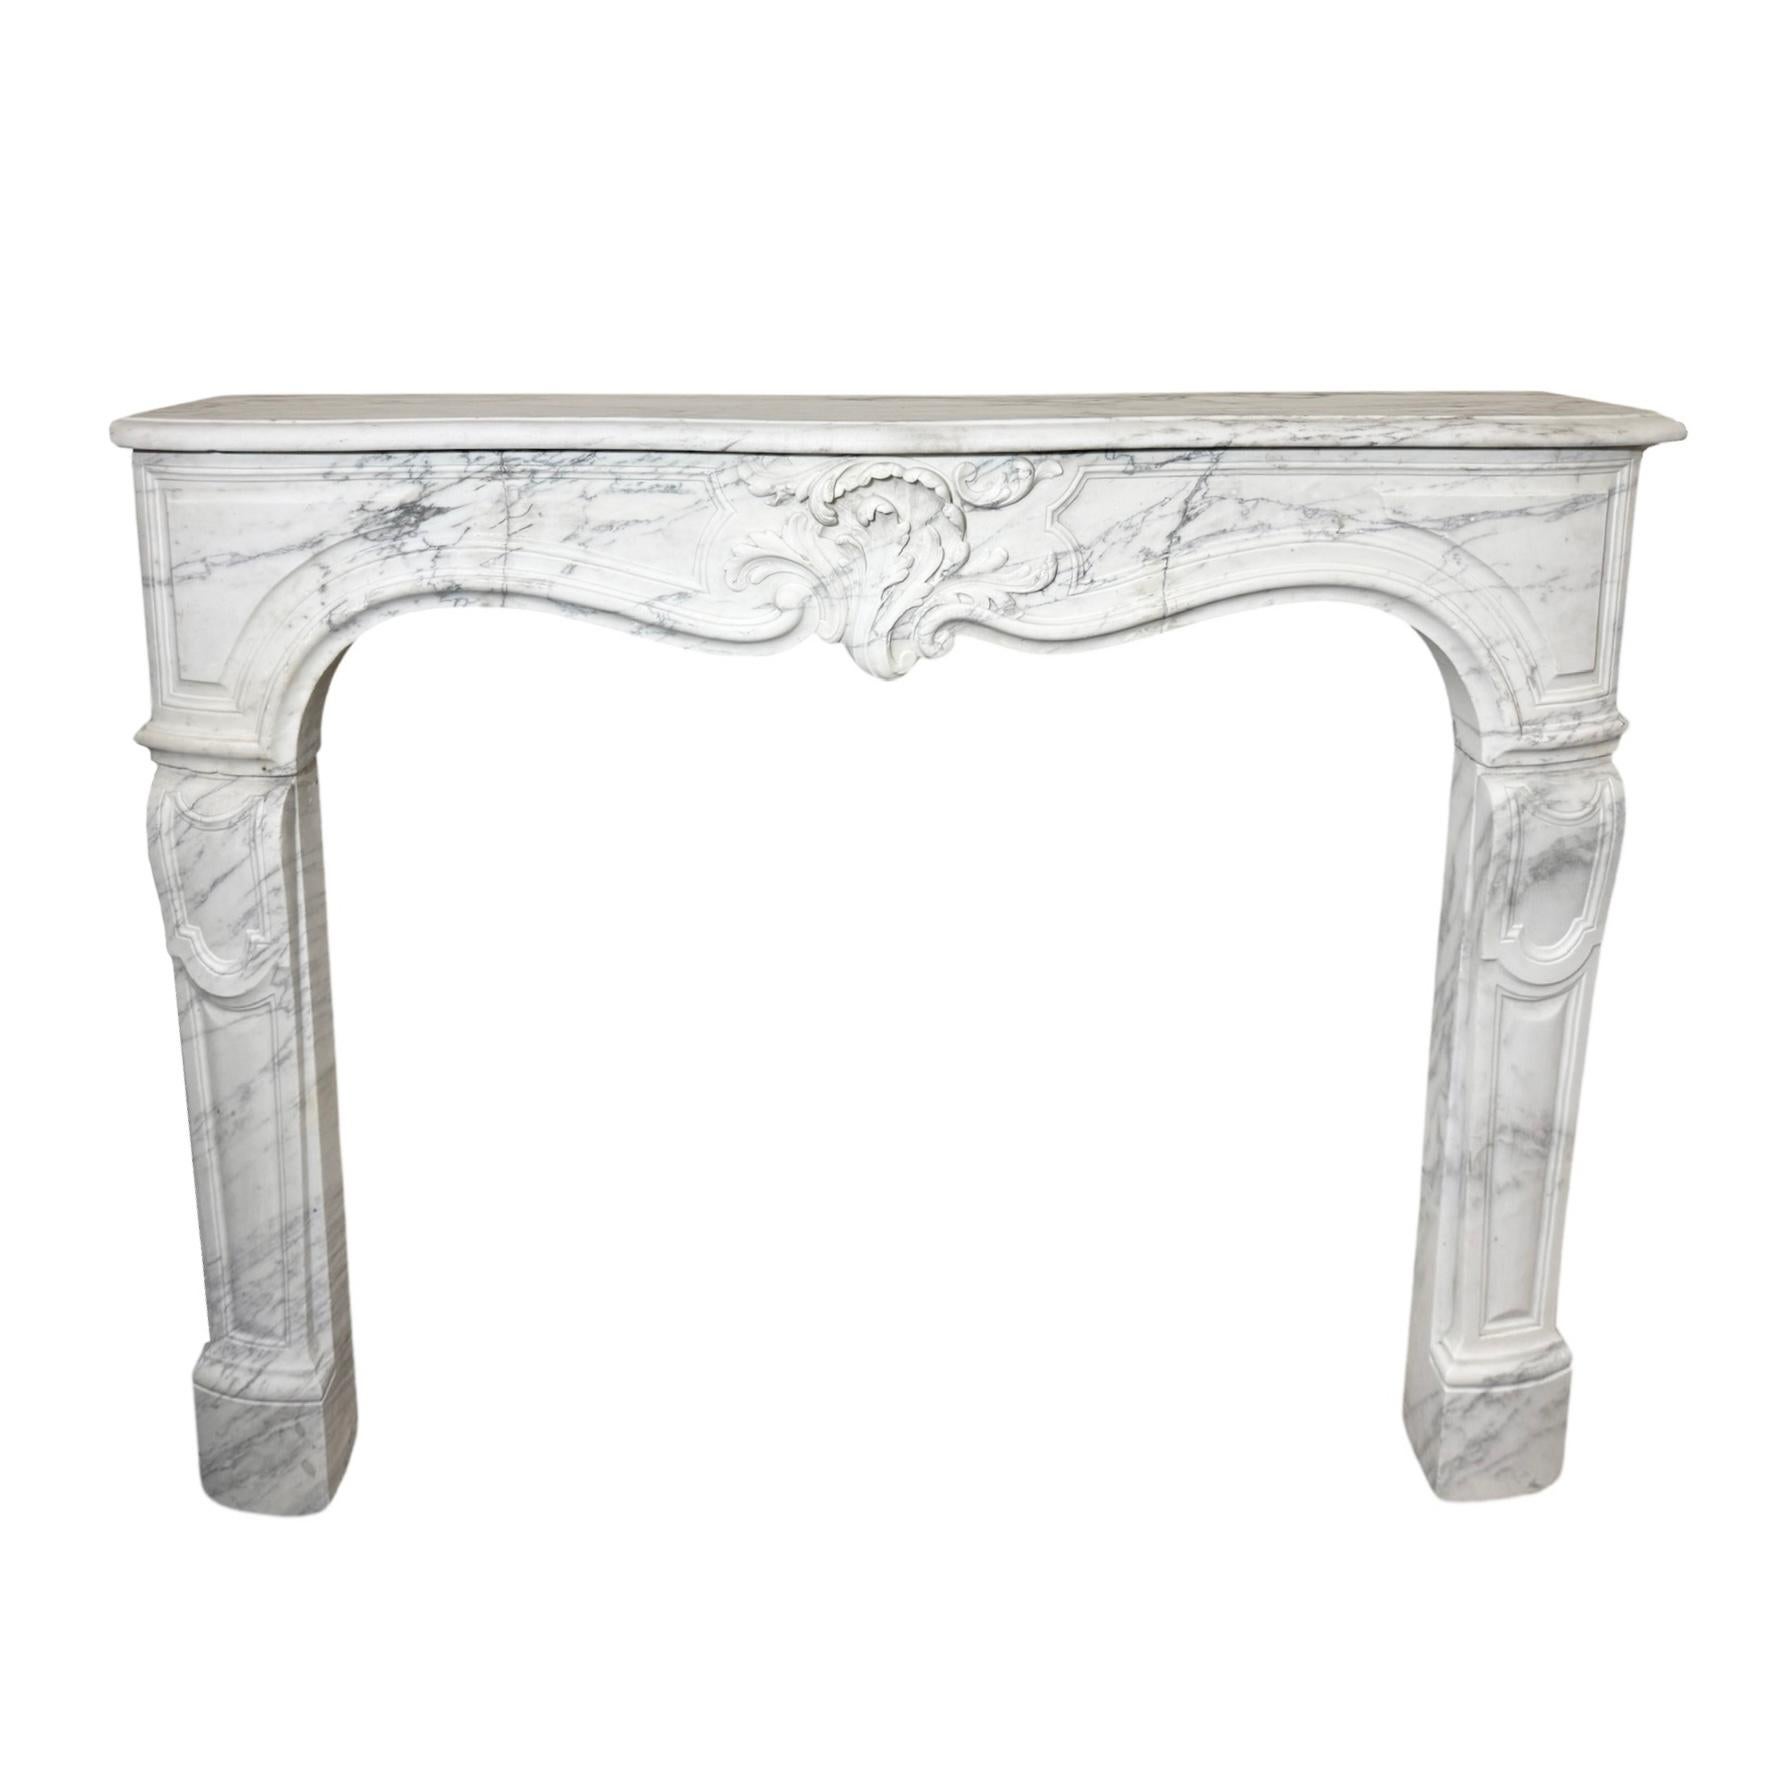 French White Carrara Marble Mantel For Sale